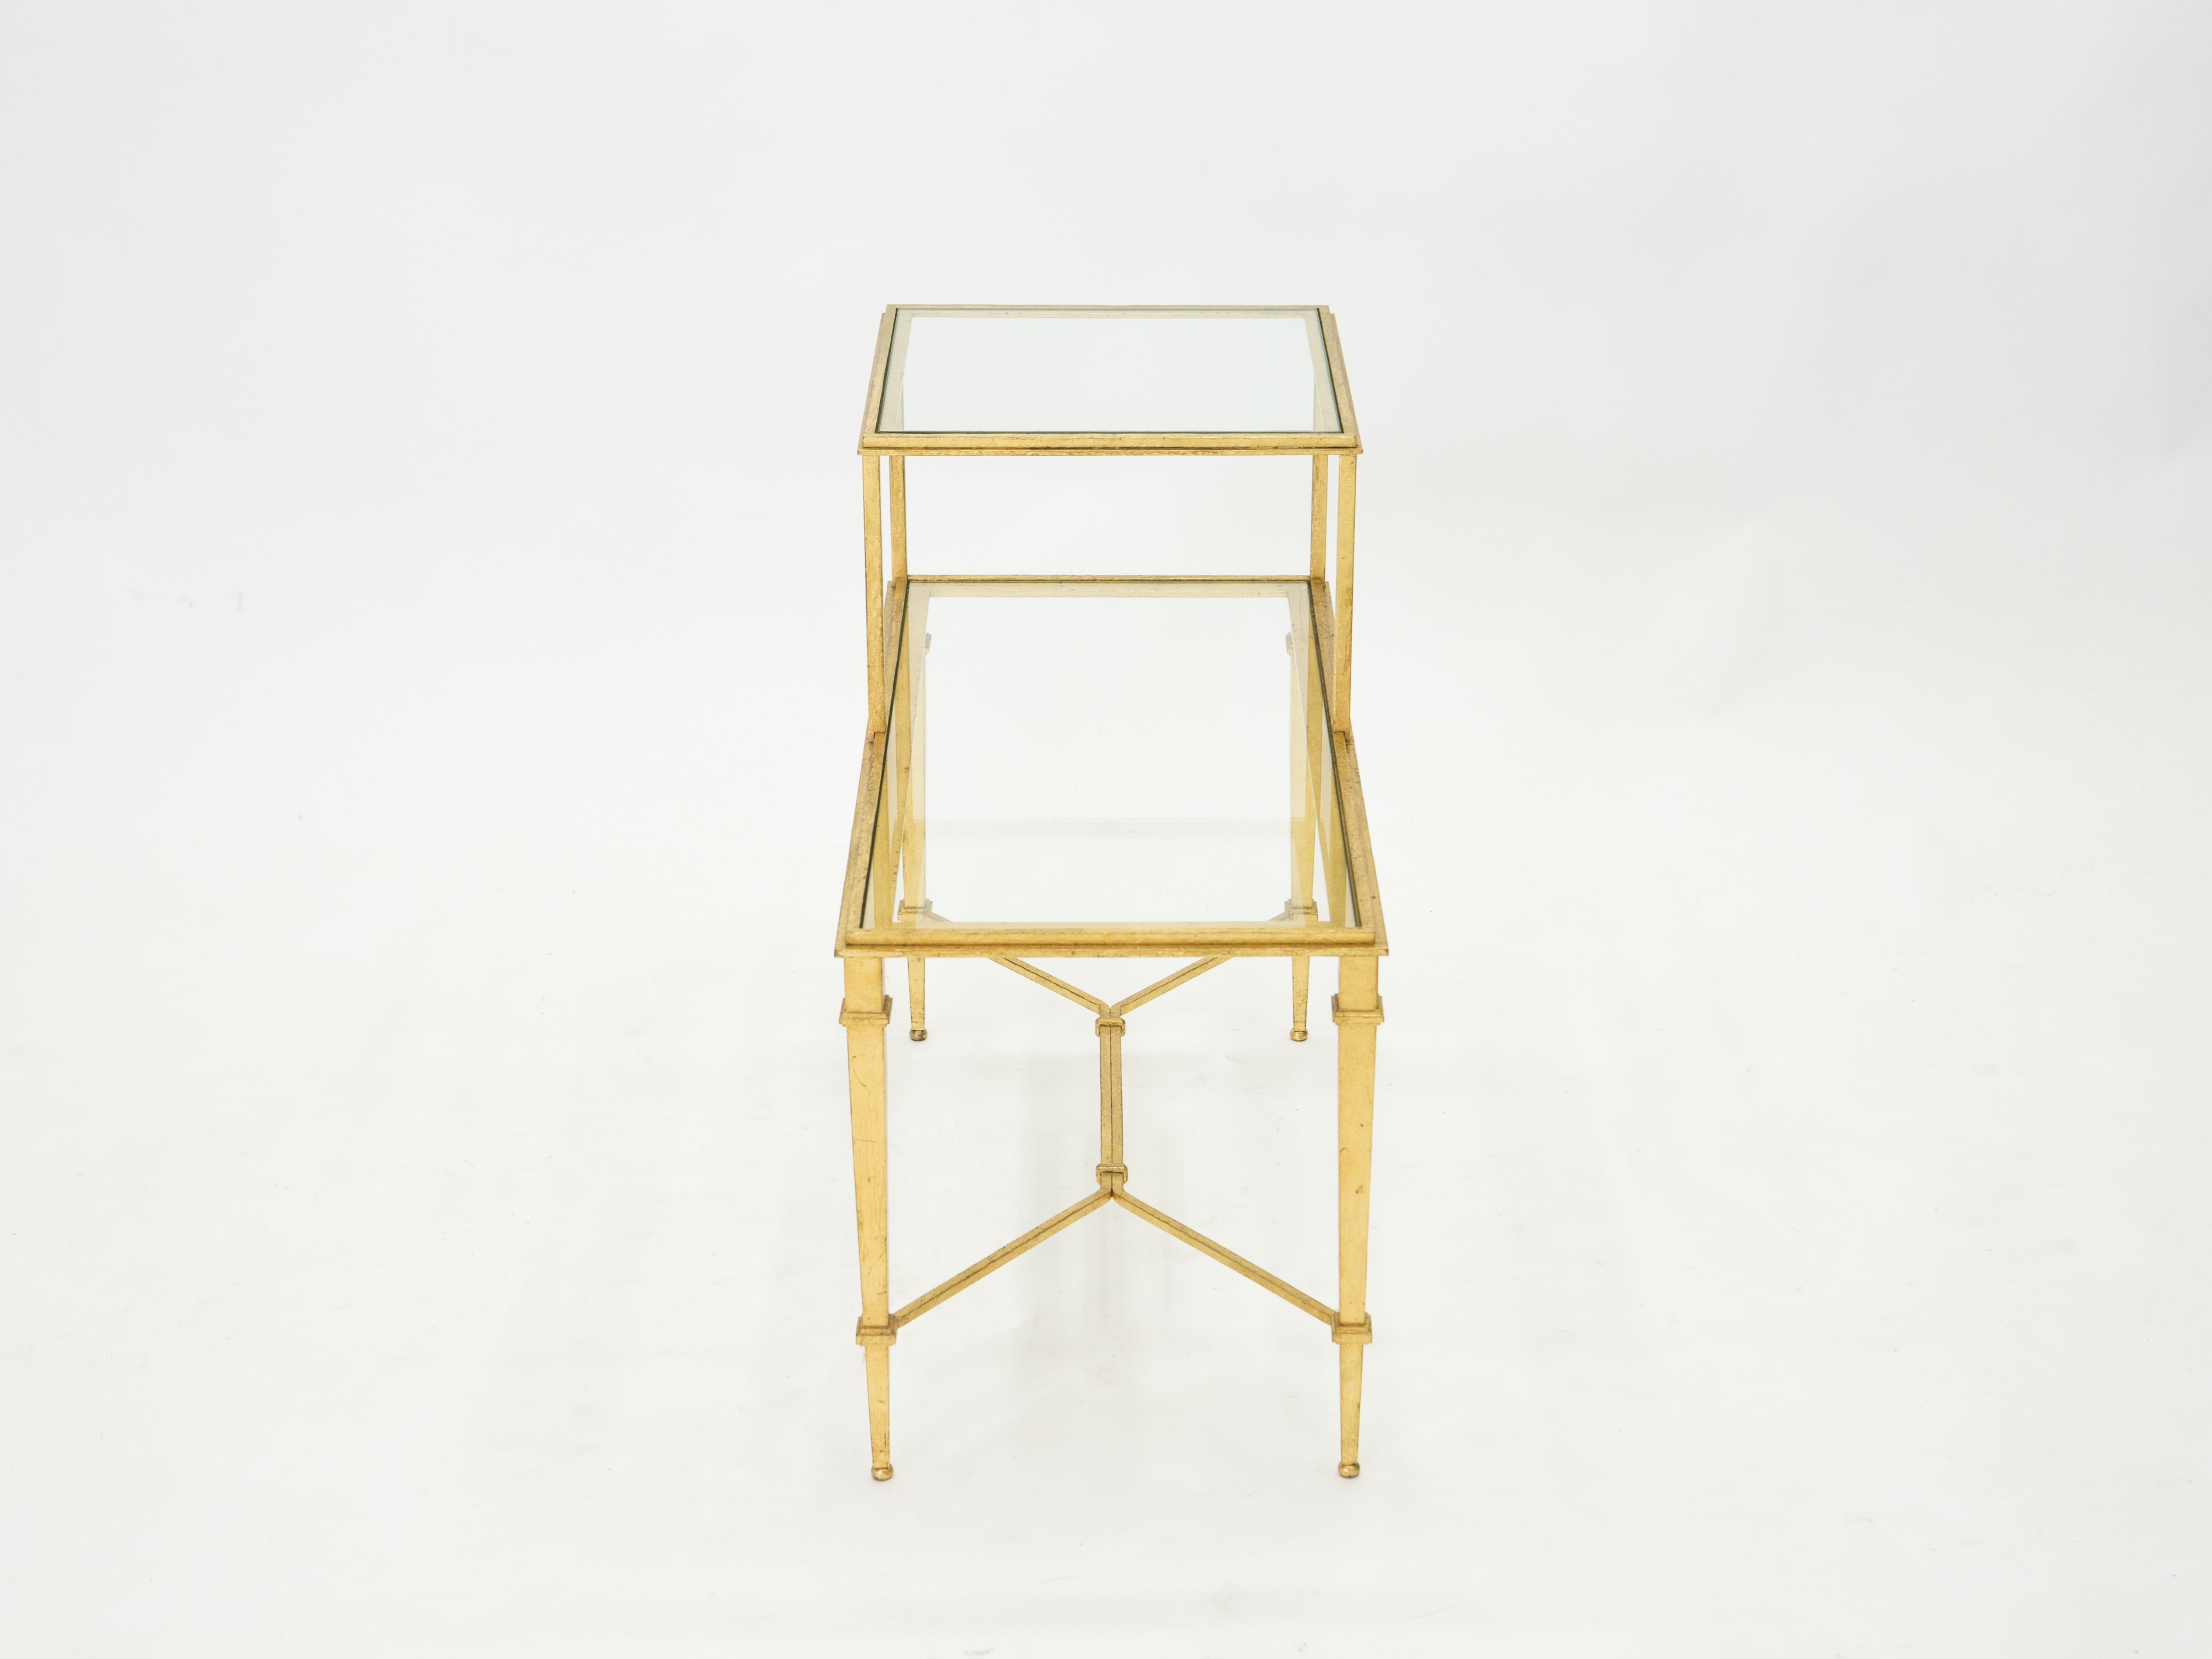 French Roger Thibier Gilt Wrought Iron Glass Two-Tier End Table, 1960s For Sale